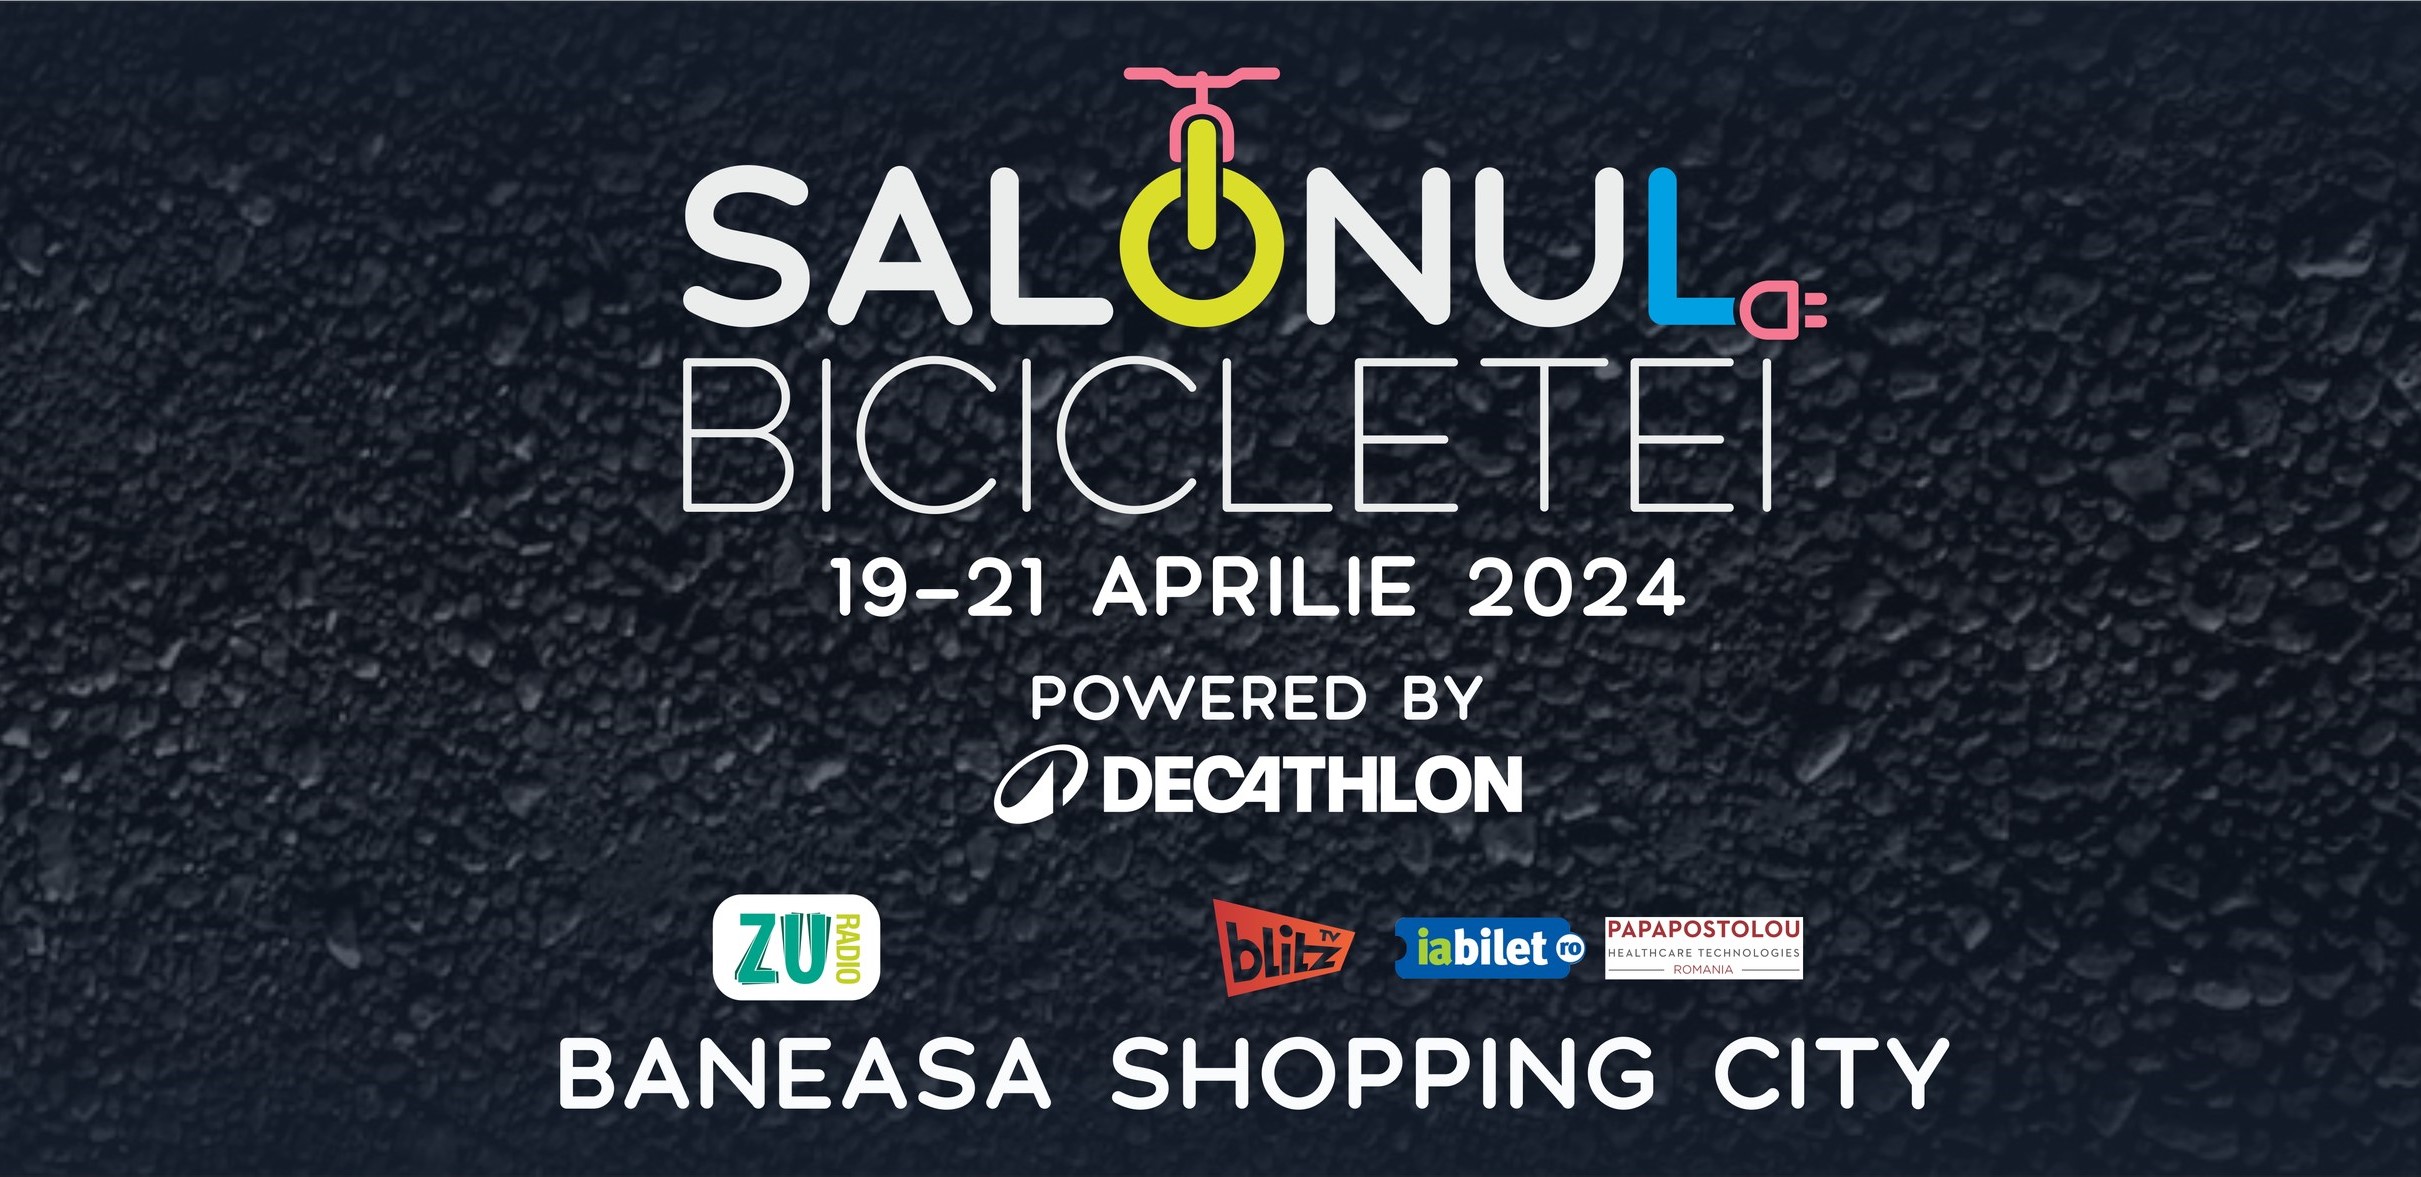 Bucharest shopping center hosts Bicycle Fair this month